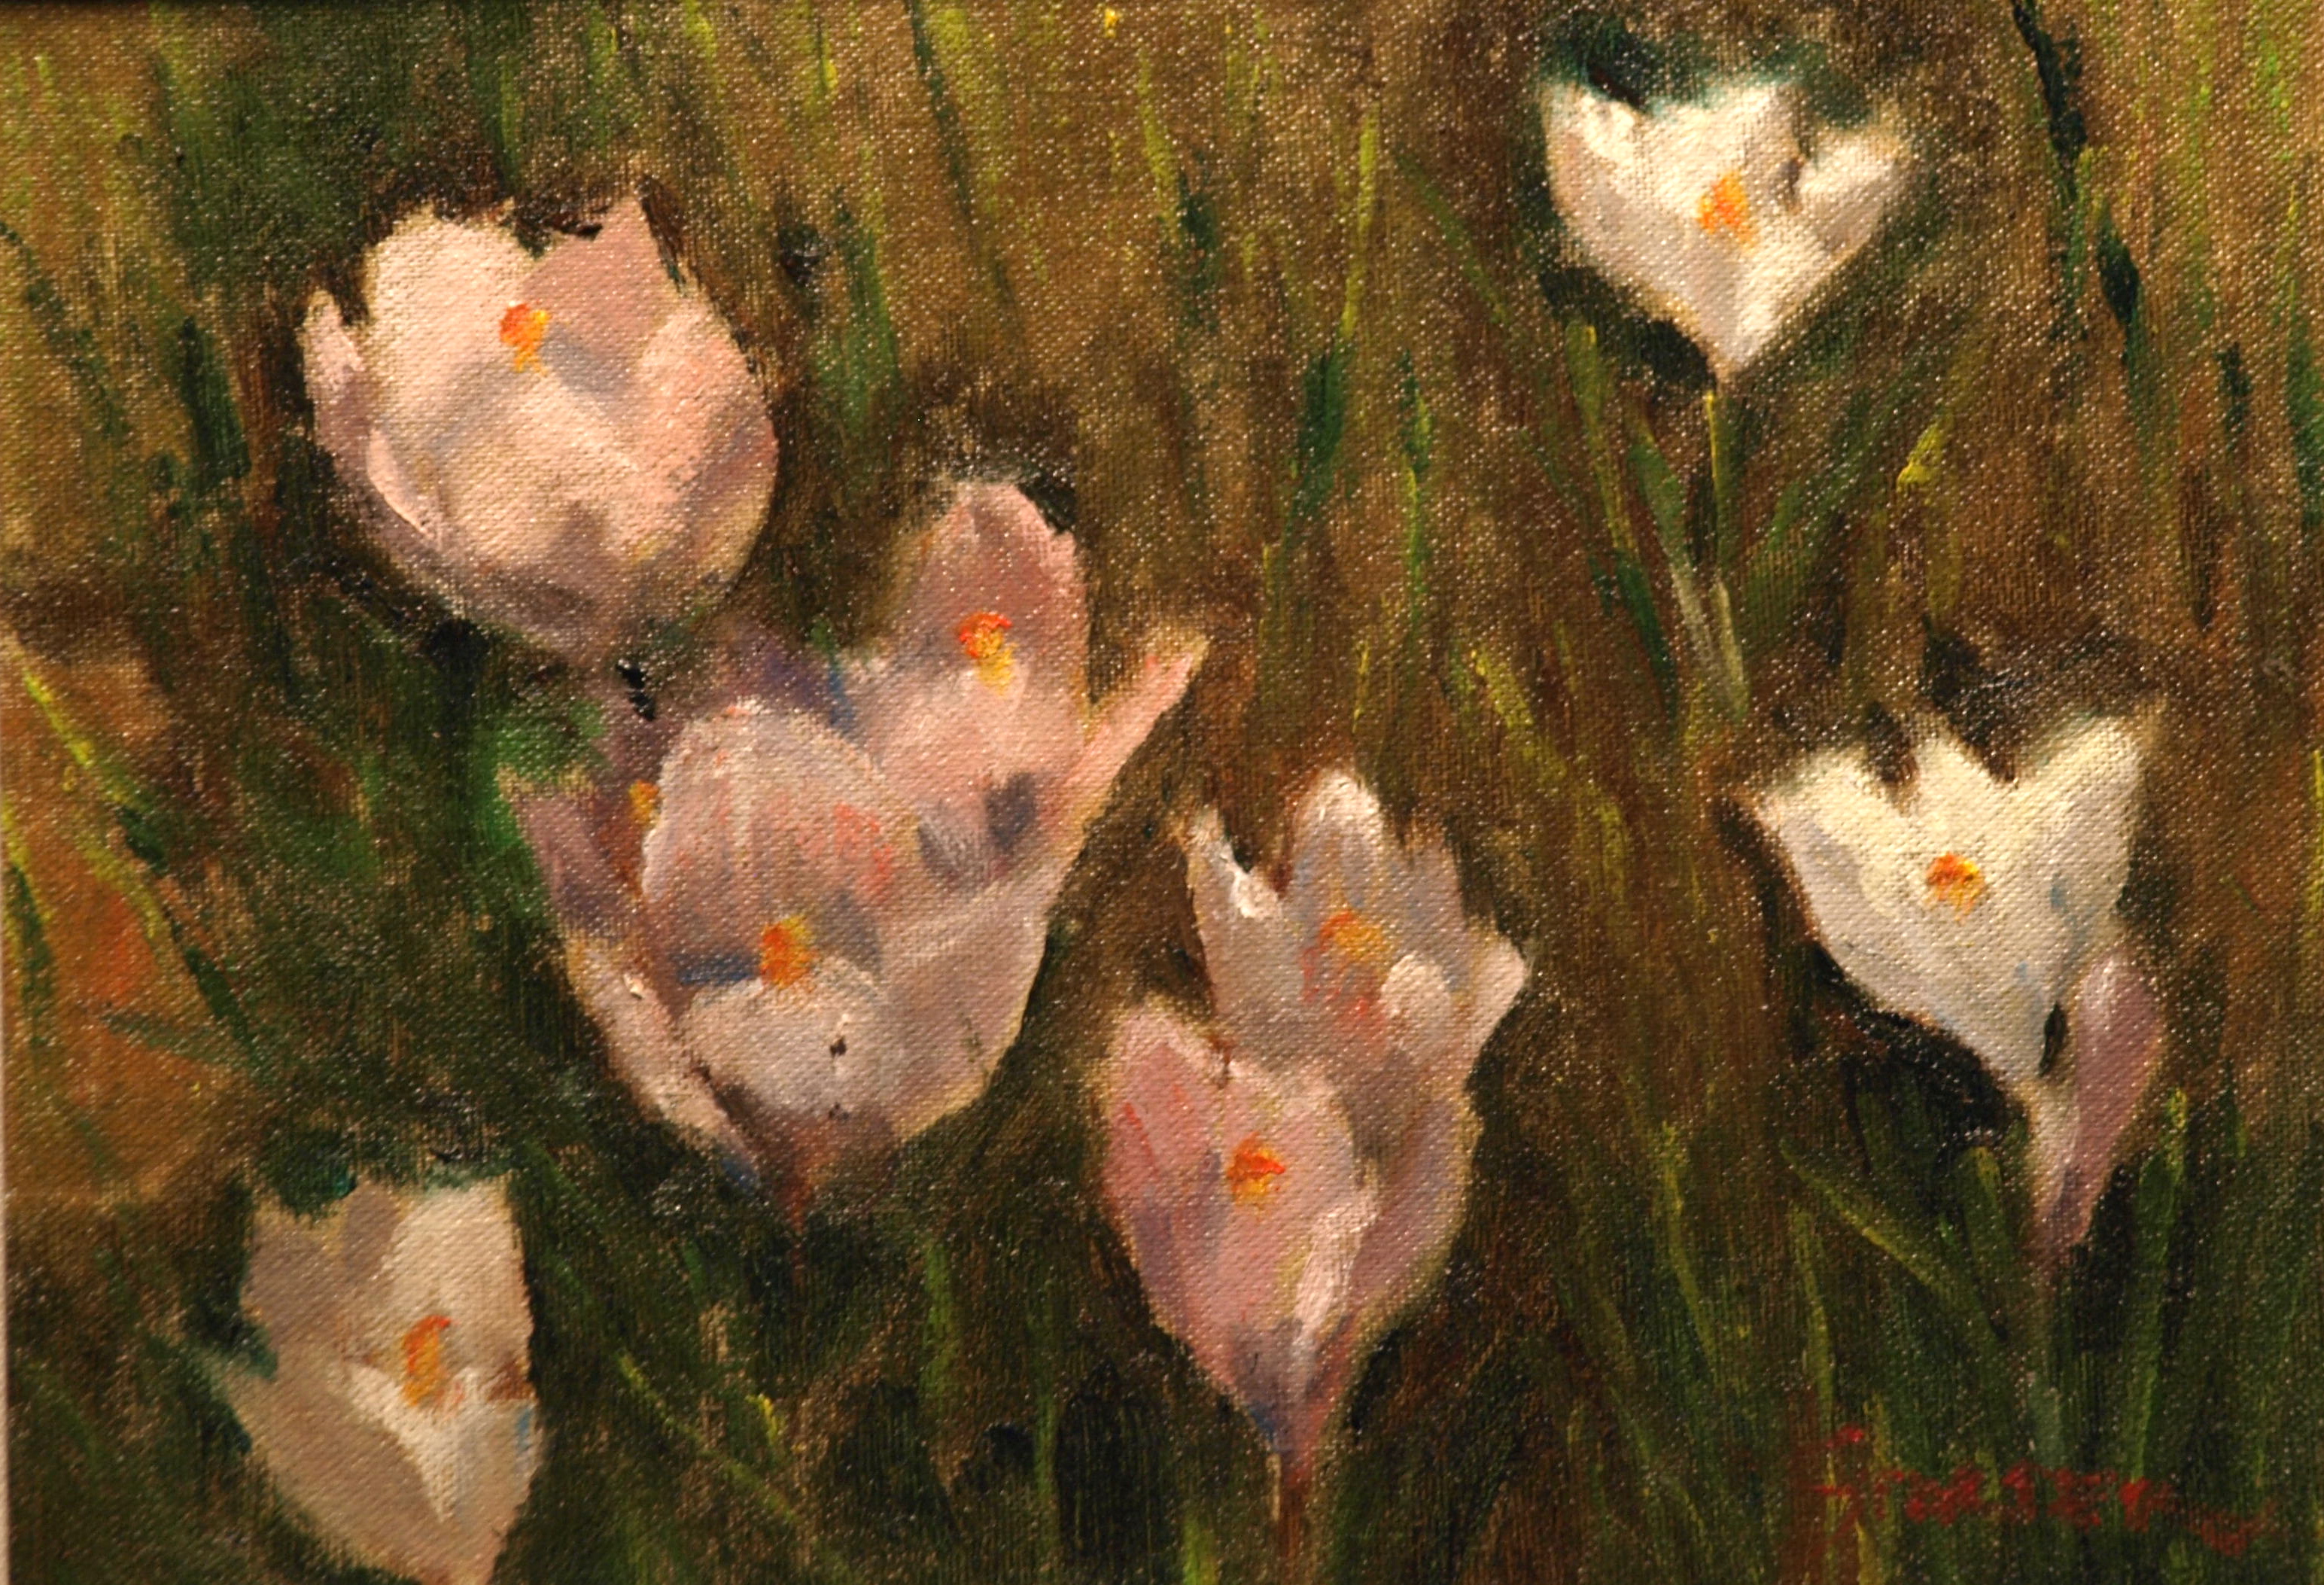 White Crocuses, Oil on Canvas on Panel, 9 x 12 Inches, by Richard Stalter, $225